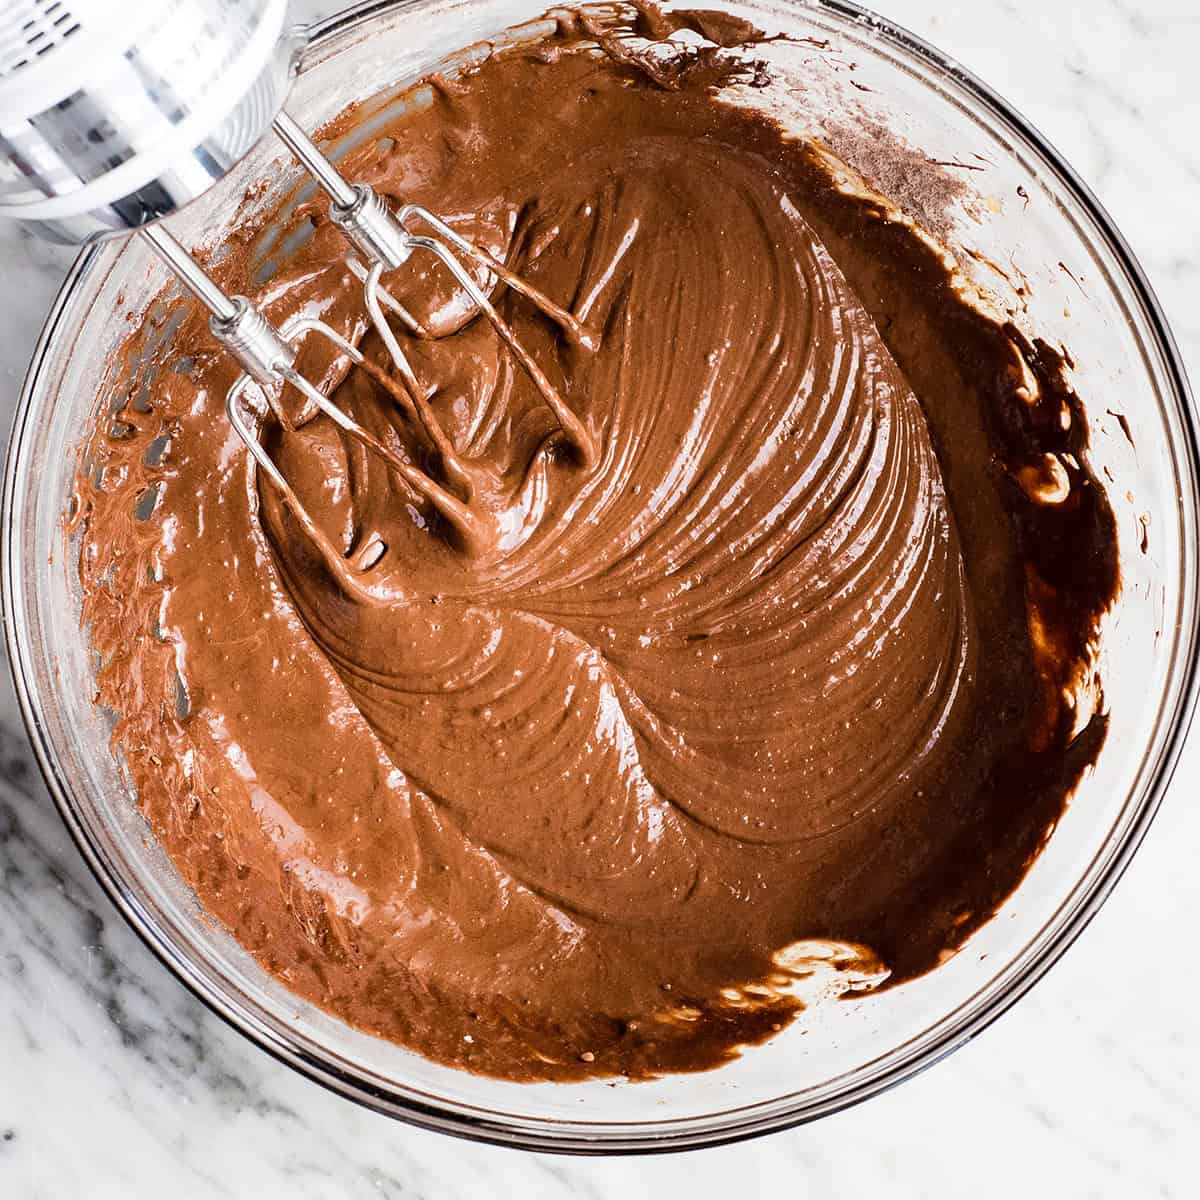 How to Make Flourless Peanut Butter Brownies batter after beating in all ingredients